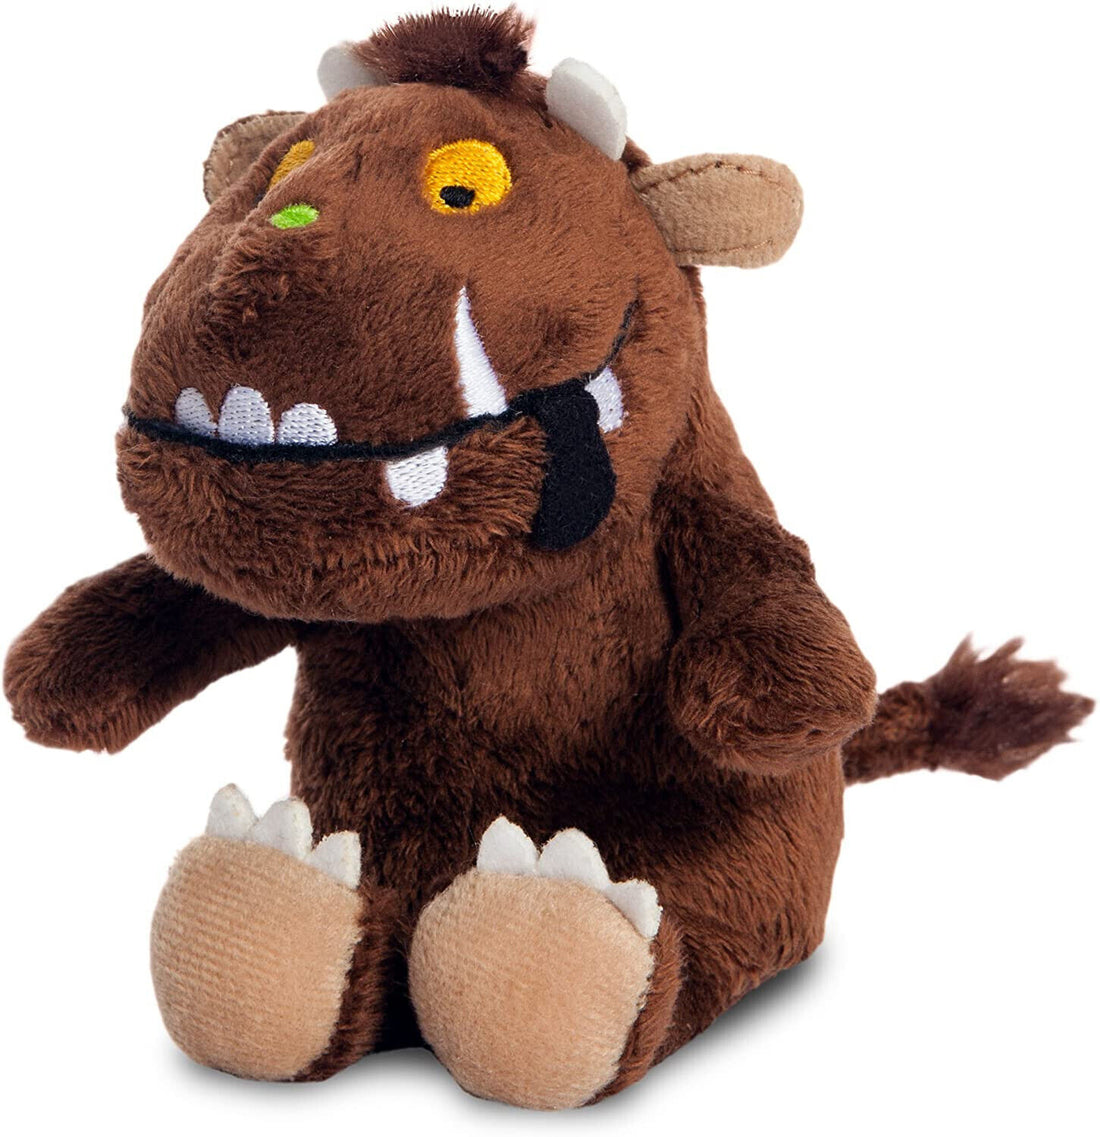 Aurora presents The Gruffalo Plush Toy in a variety of sizes available - GRUFFALO 6 INCH